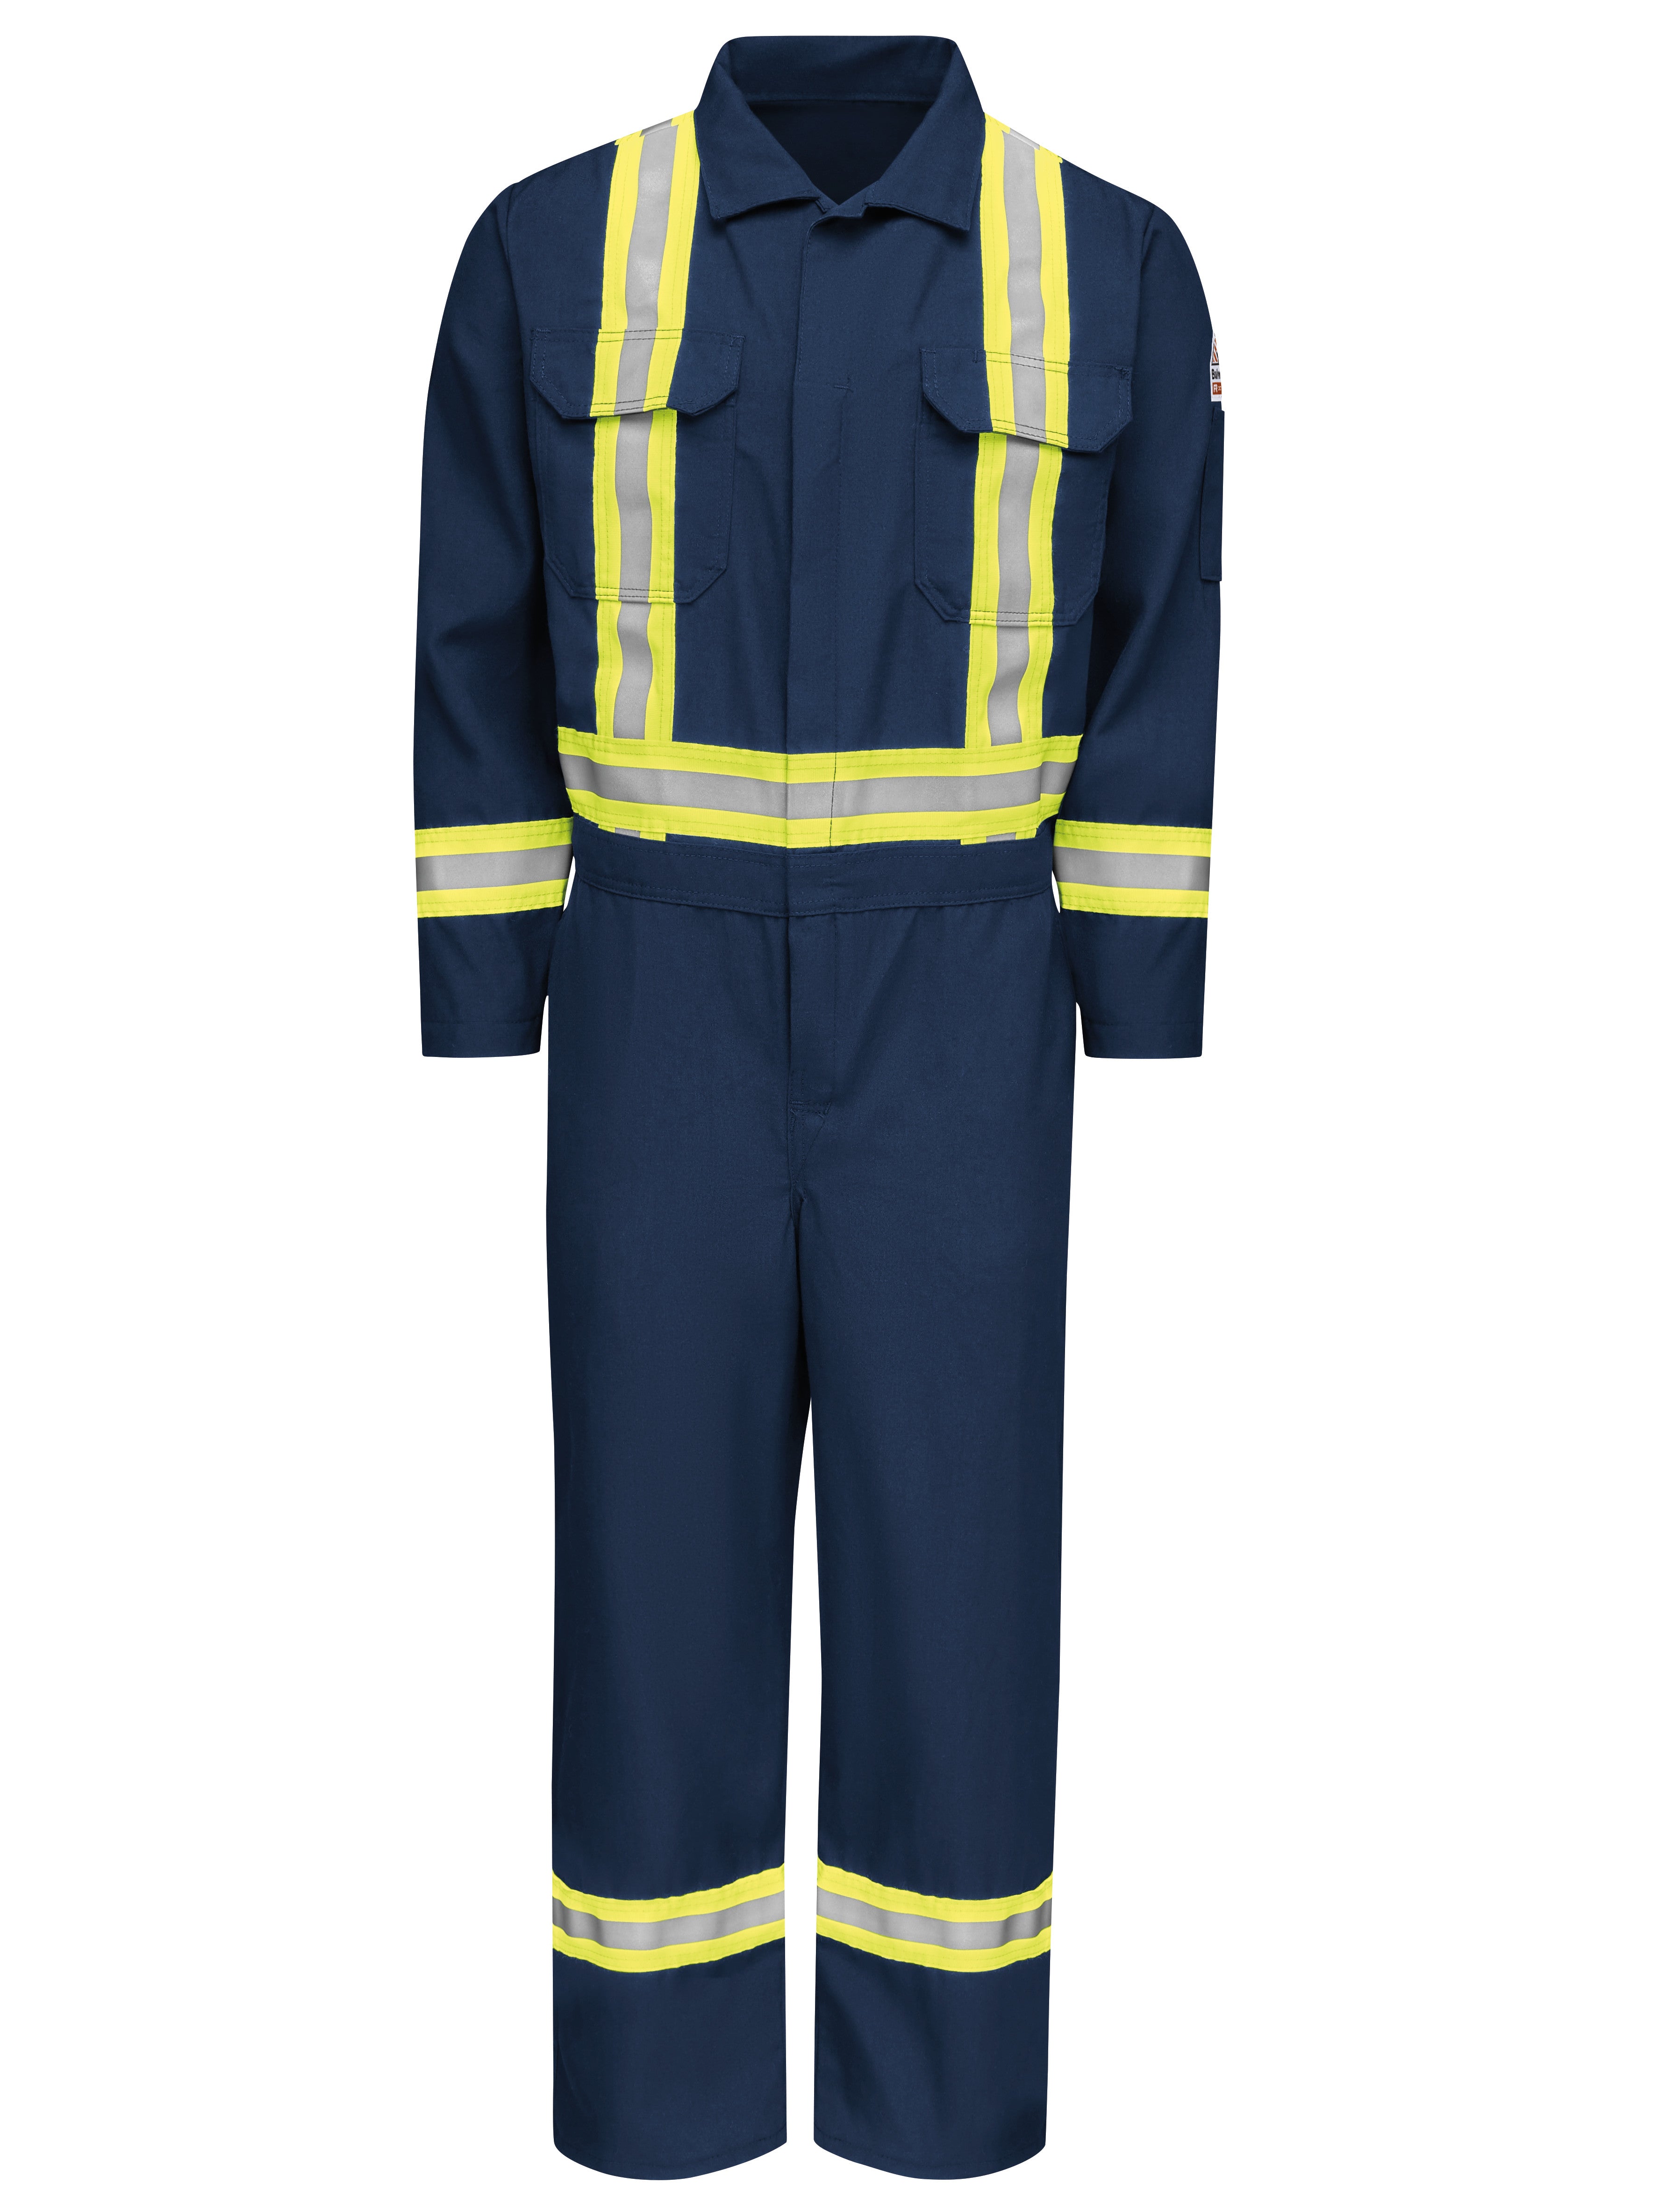 Men's Midweight Nomex FR Premium Coverall with CSA Compliant Reflective Trim CNBC - Navy-eSafety Supplies, Inc